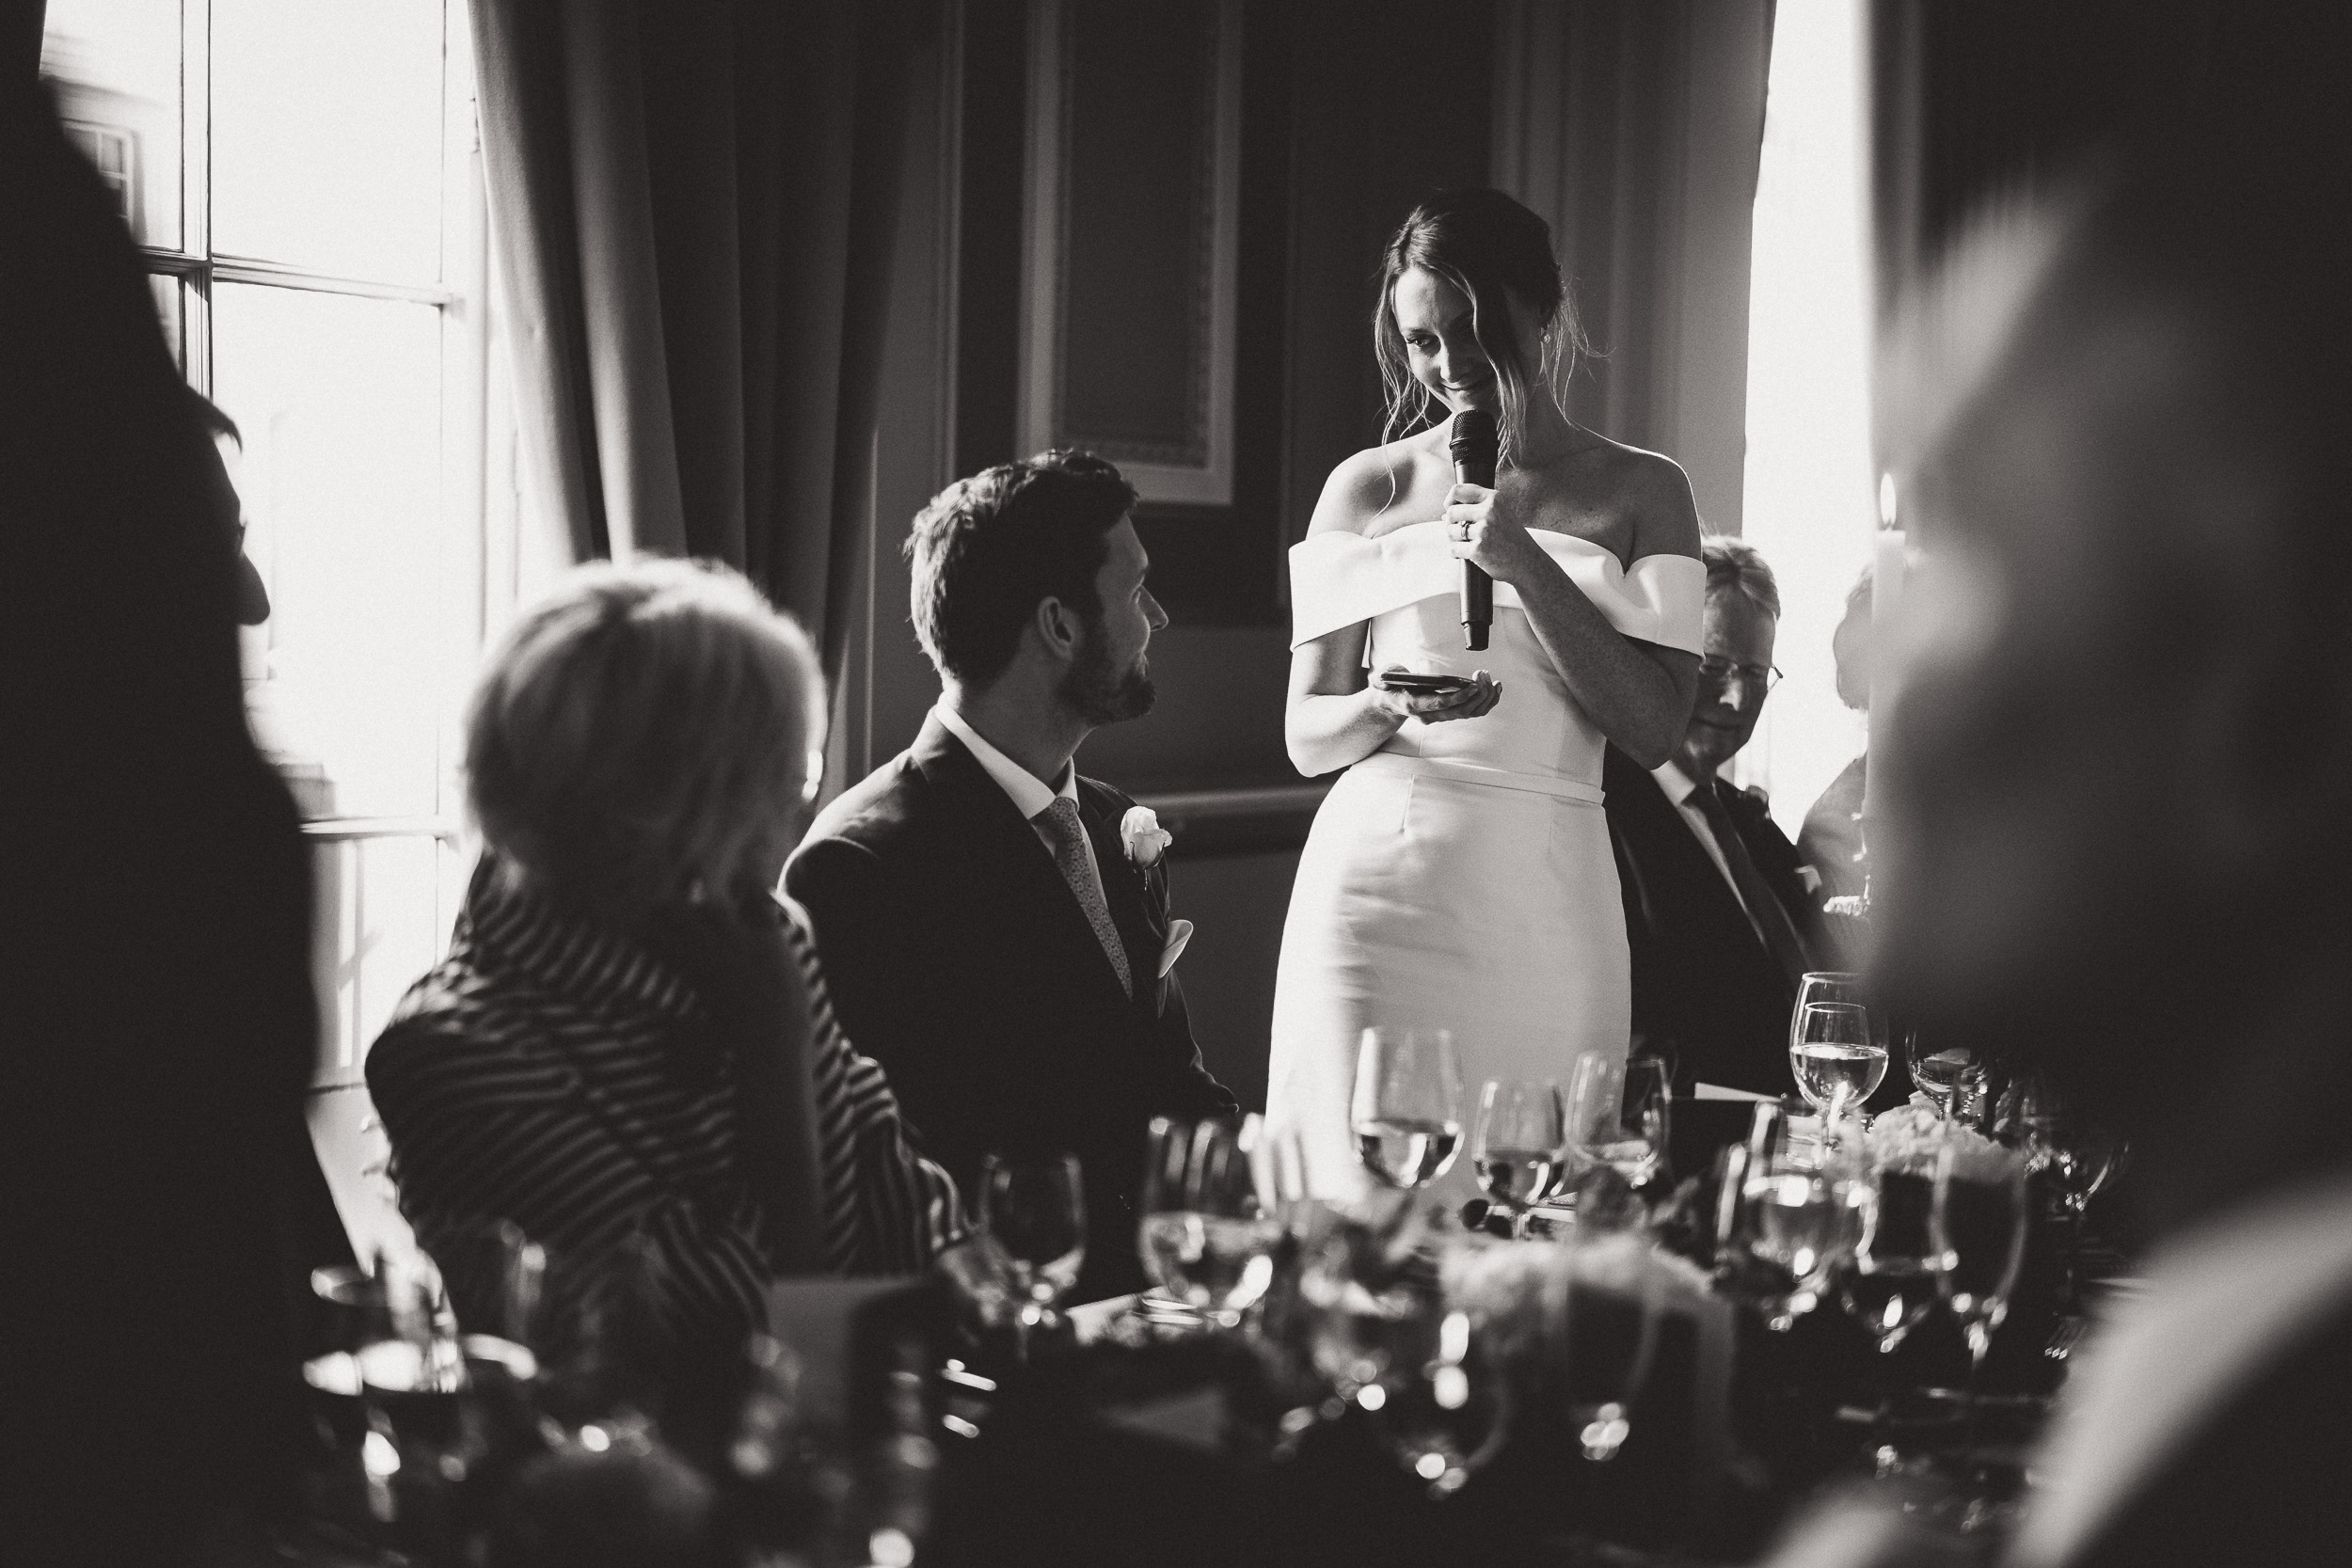 A bride giving a speech at her wedding, captured by the wedding photographer in a memorable wedding photo.